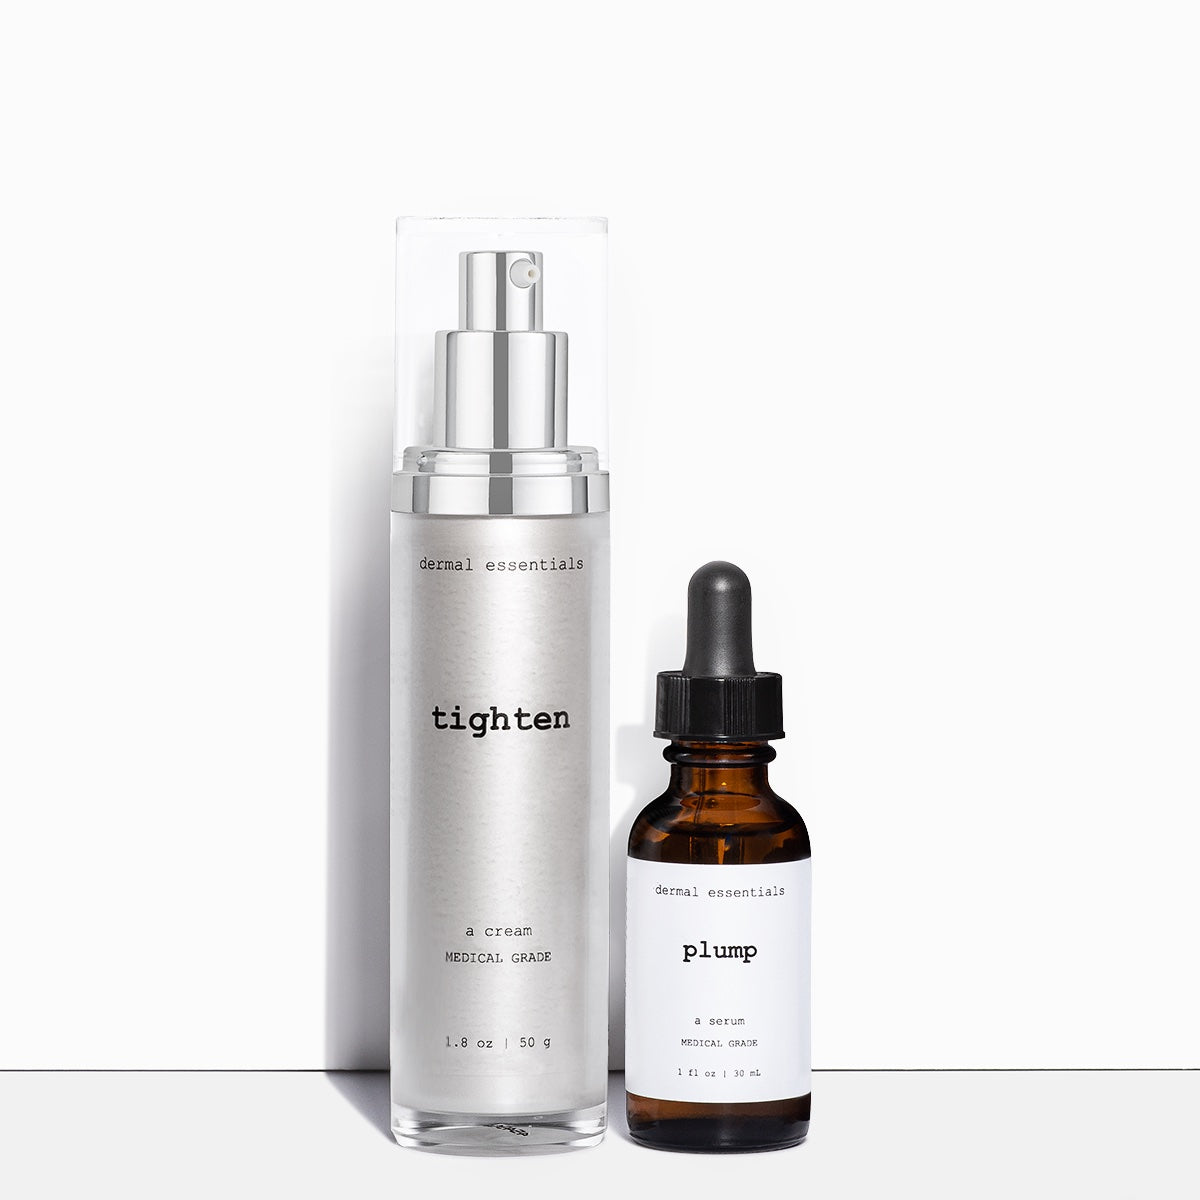 two images one silver cylinder pump bottle black letters clear plastic lid tighten anti-aging neck cream 1.8 oz. amber glass dropper bottle white label black letters plump anti-aging hyaluronic acid plumping serum 1 oz. dermal essentials medical grade skincare 